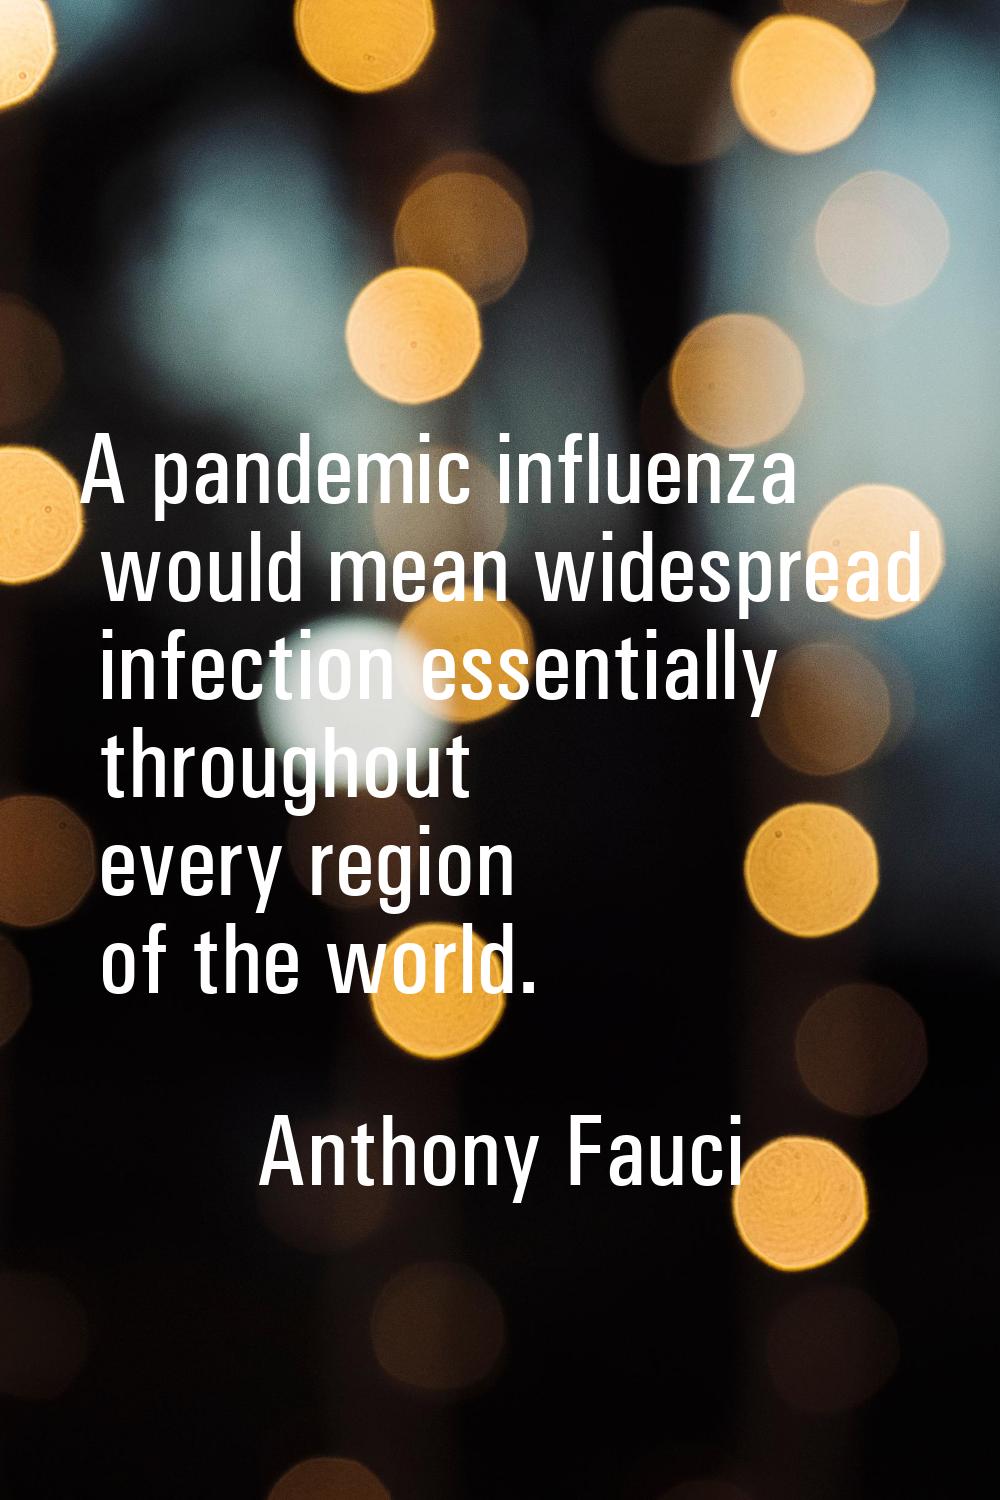 A pandemic influenza would mean widespread infection essentially throughout every region of the wor